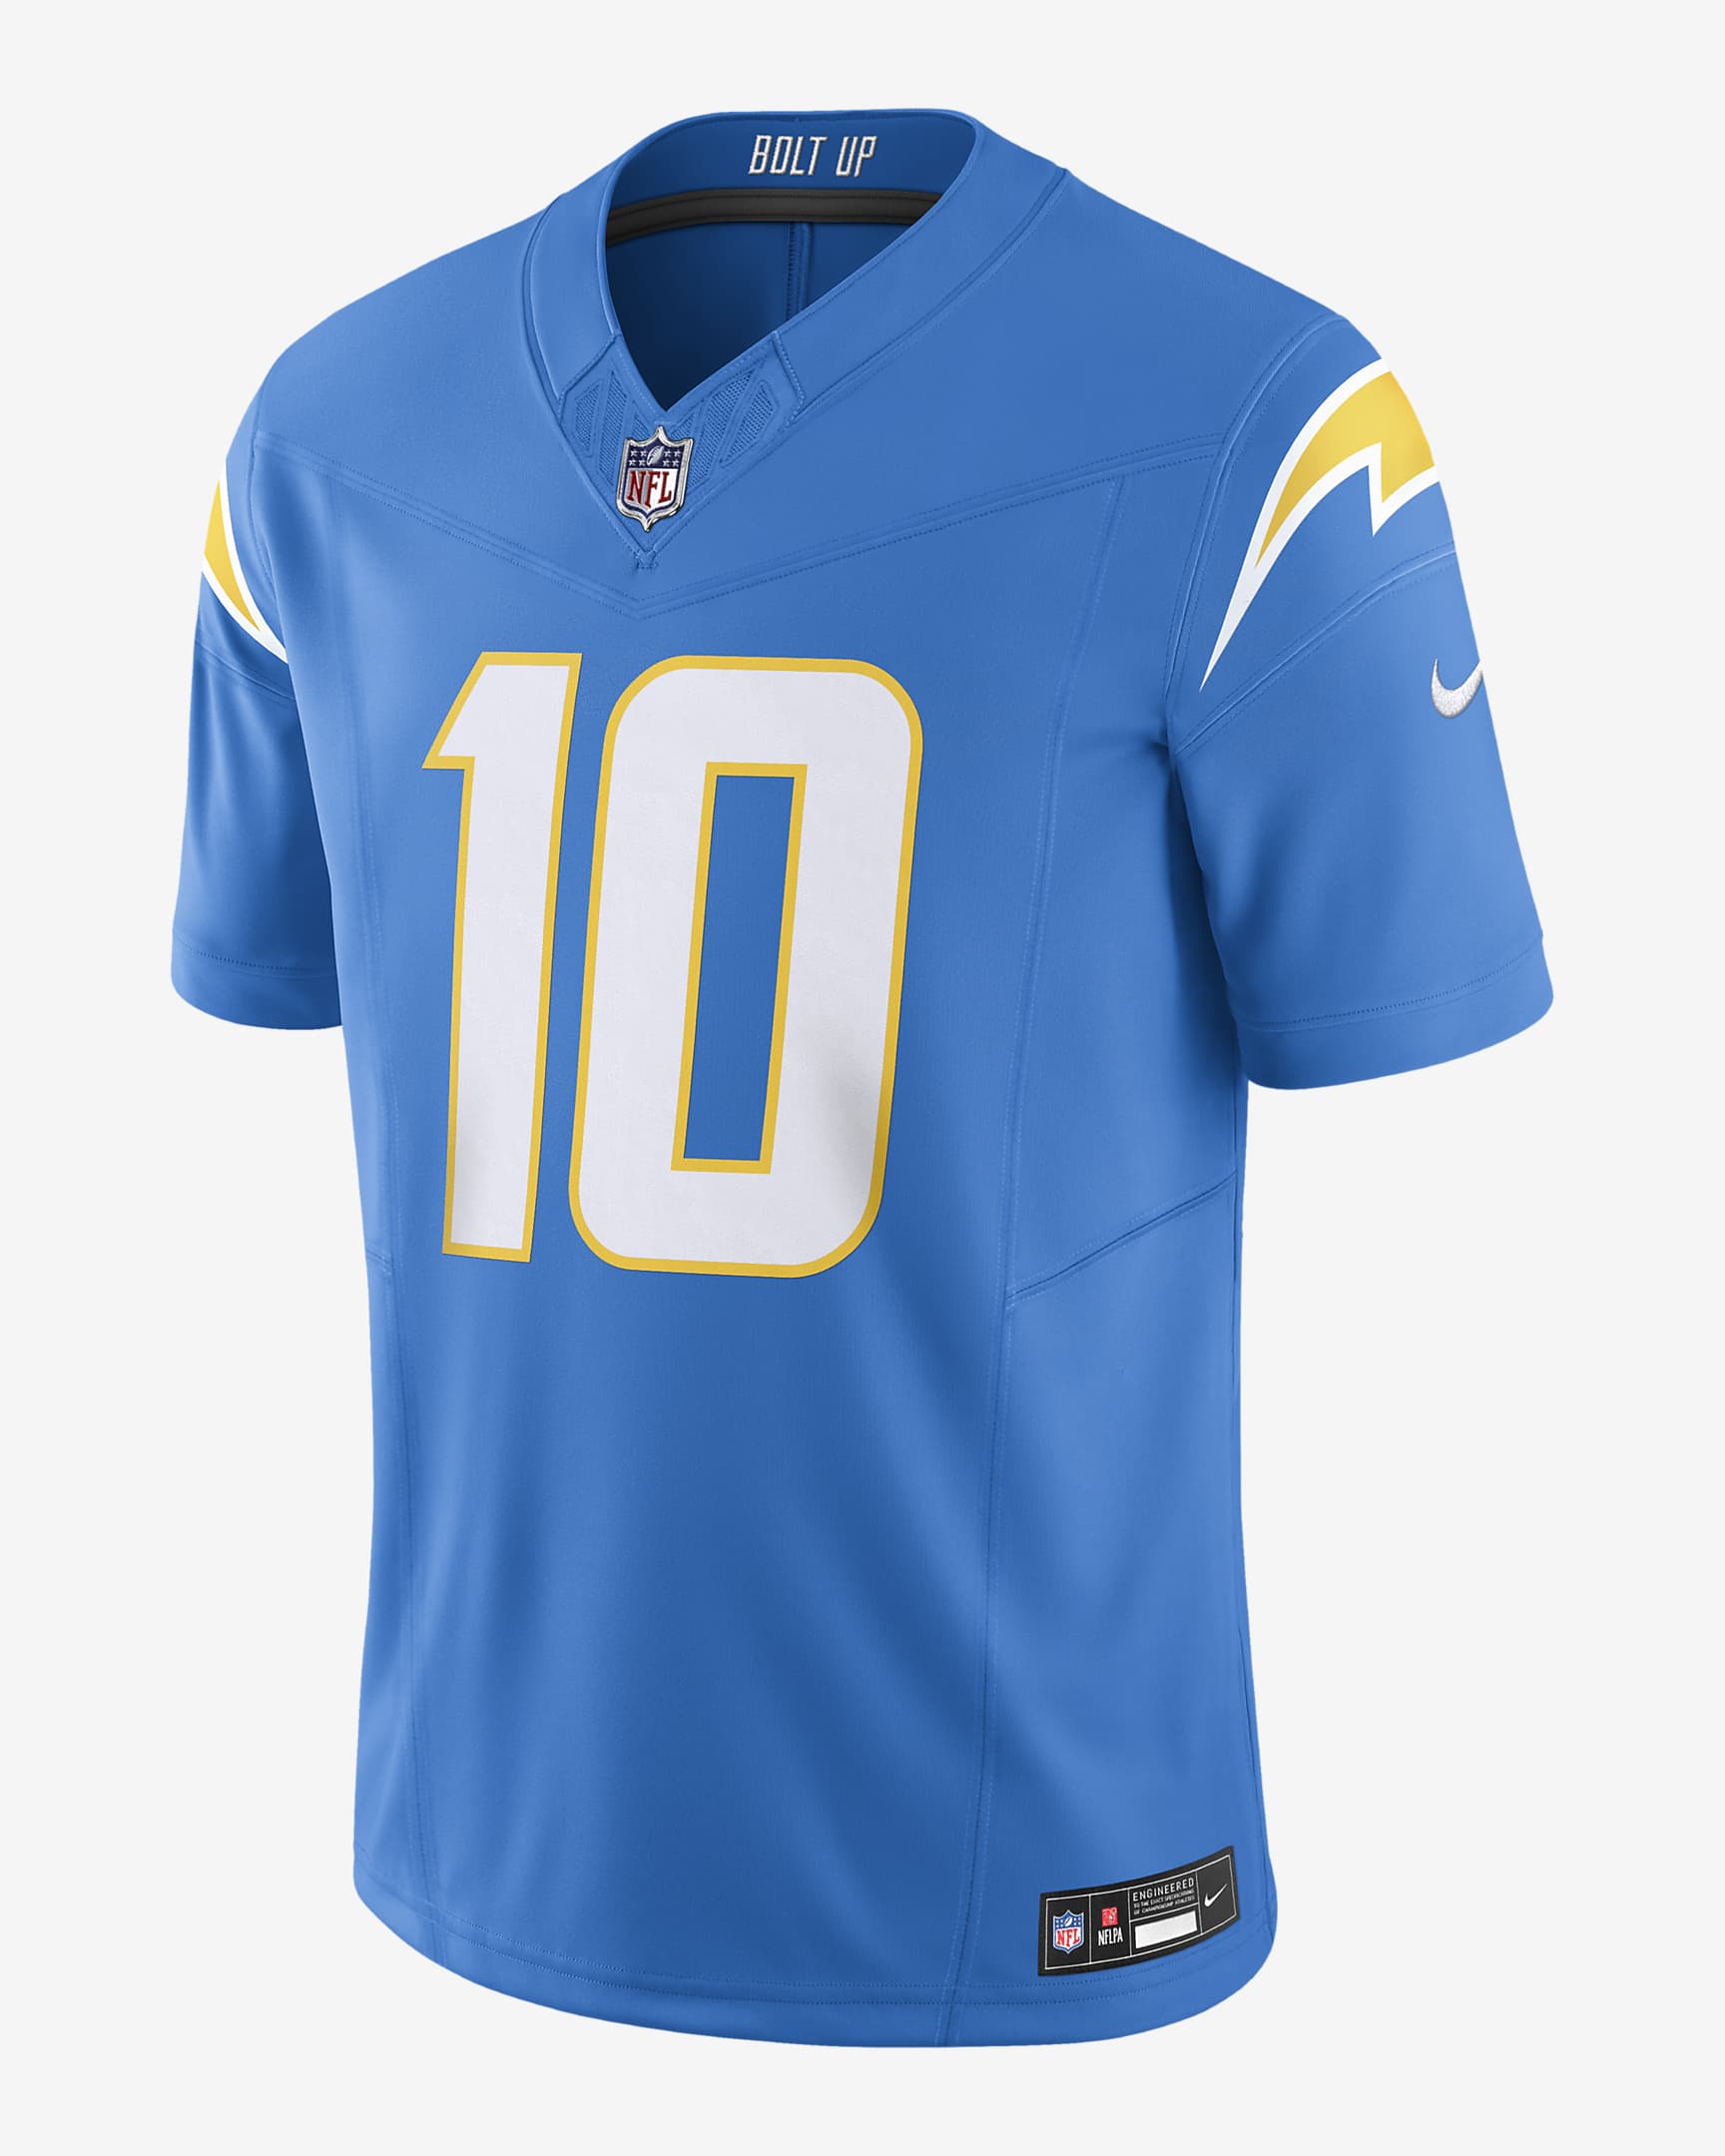 Justin Herbert Los Angeles Chargers Men's Nike Dri-FIT NFL Limited ...